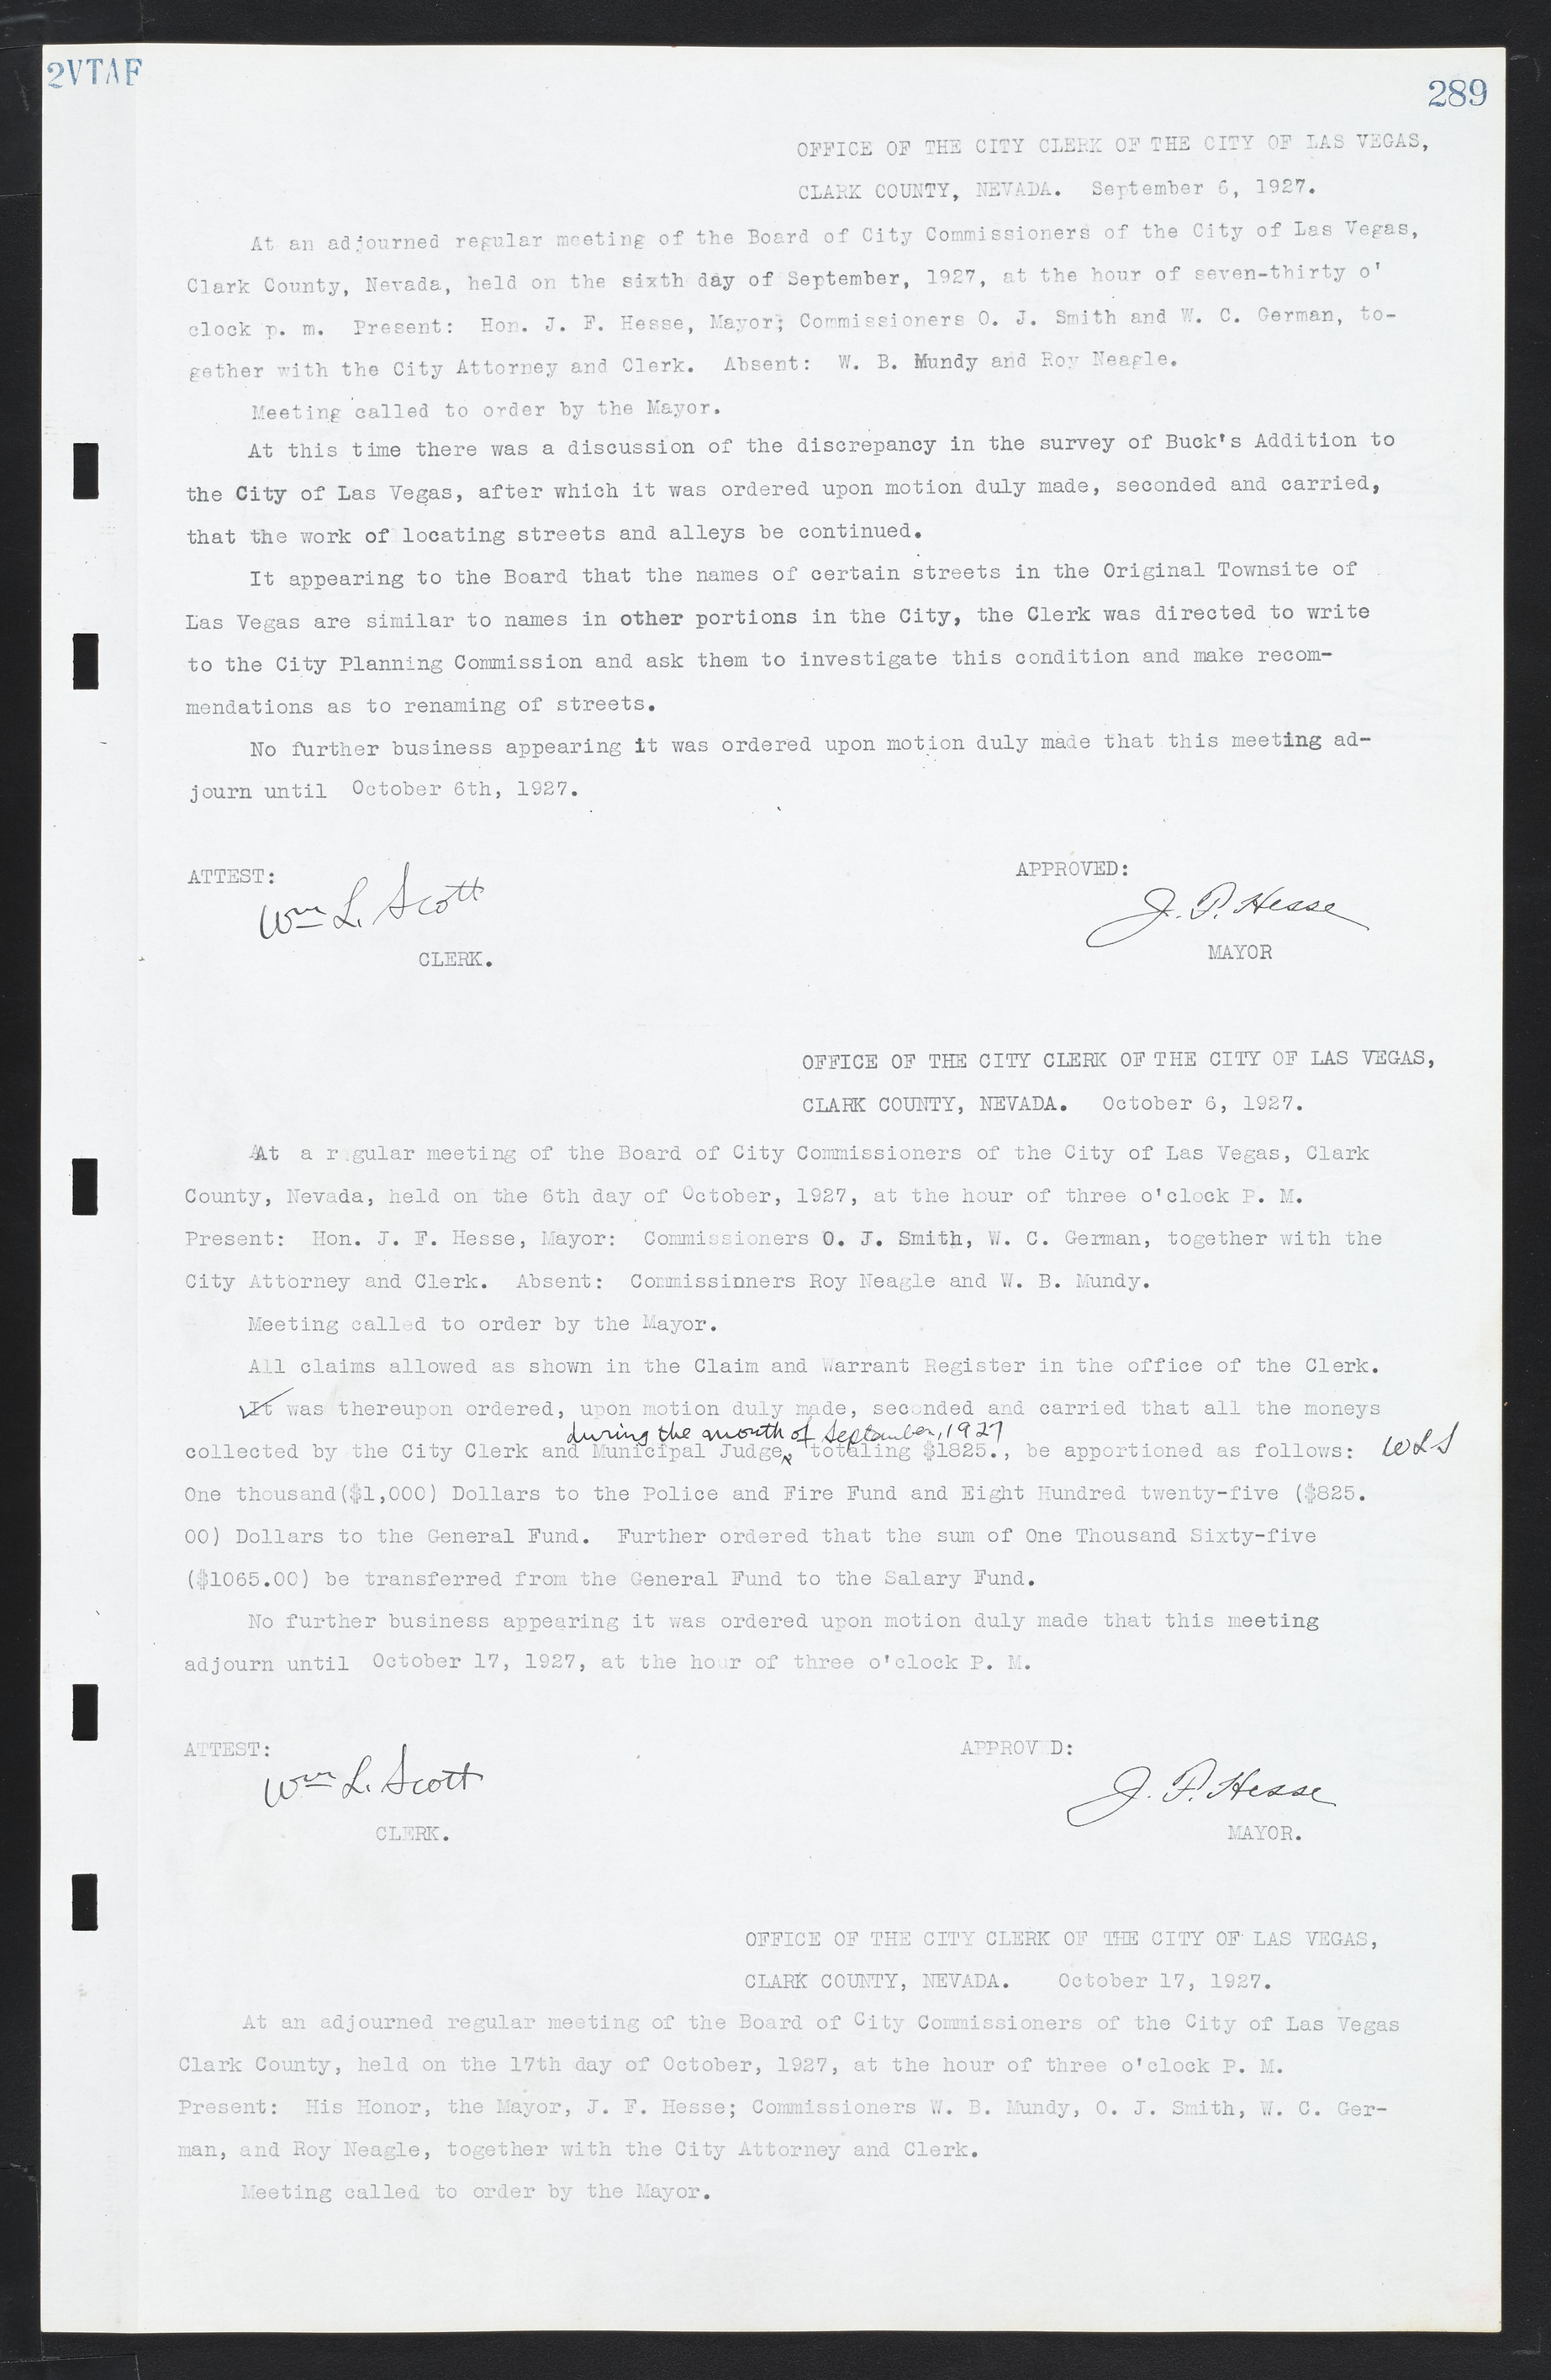 Las Vegas City Commission Minutes, March 1, 1922 to May 10, 1929, lvc000002-298